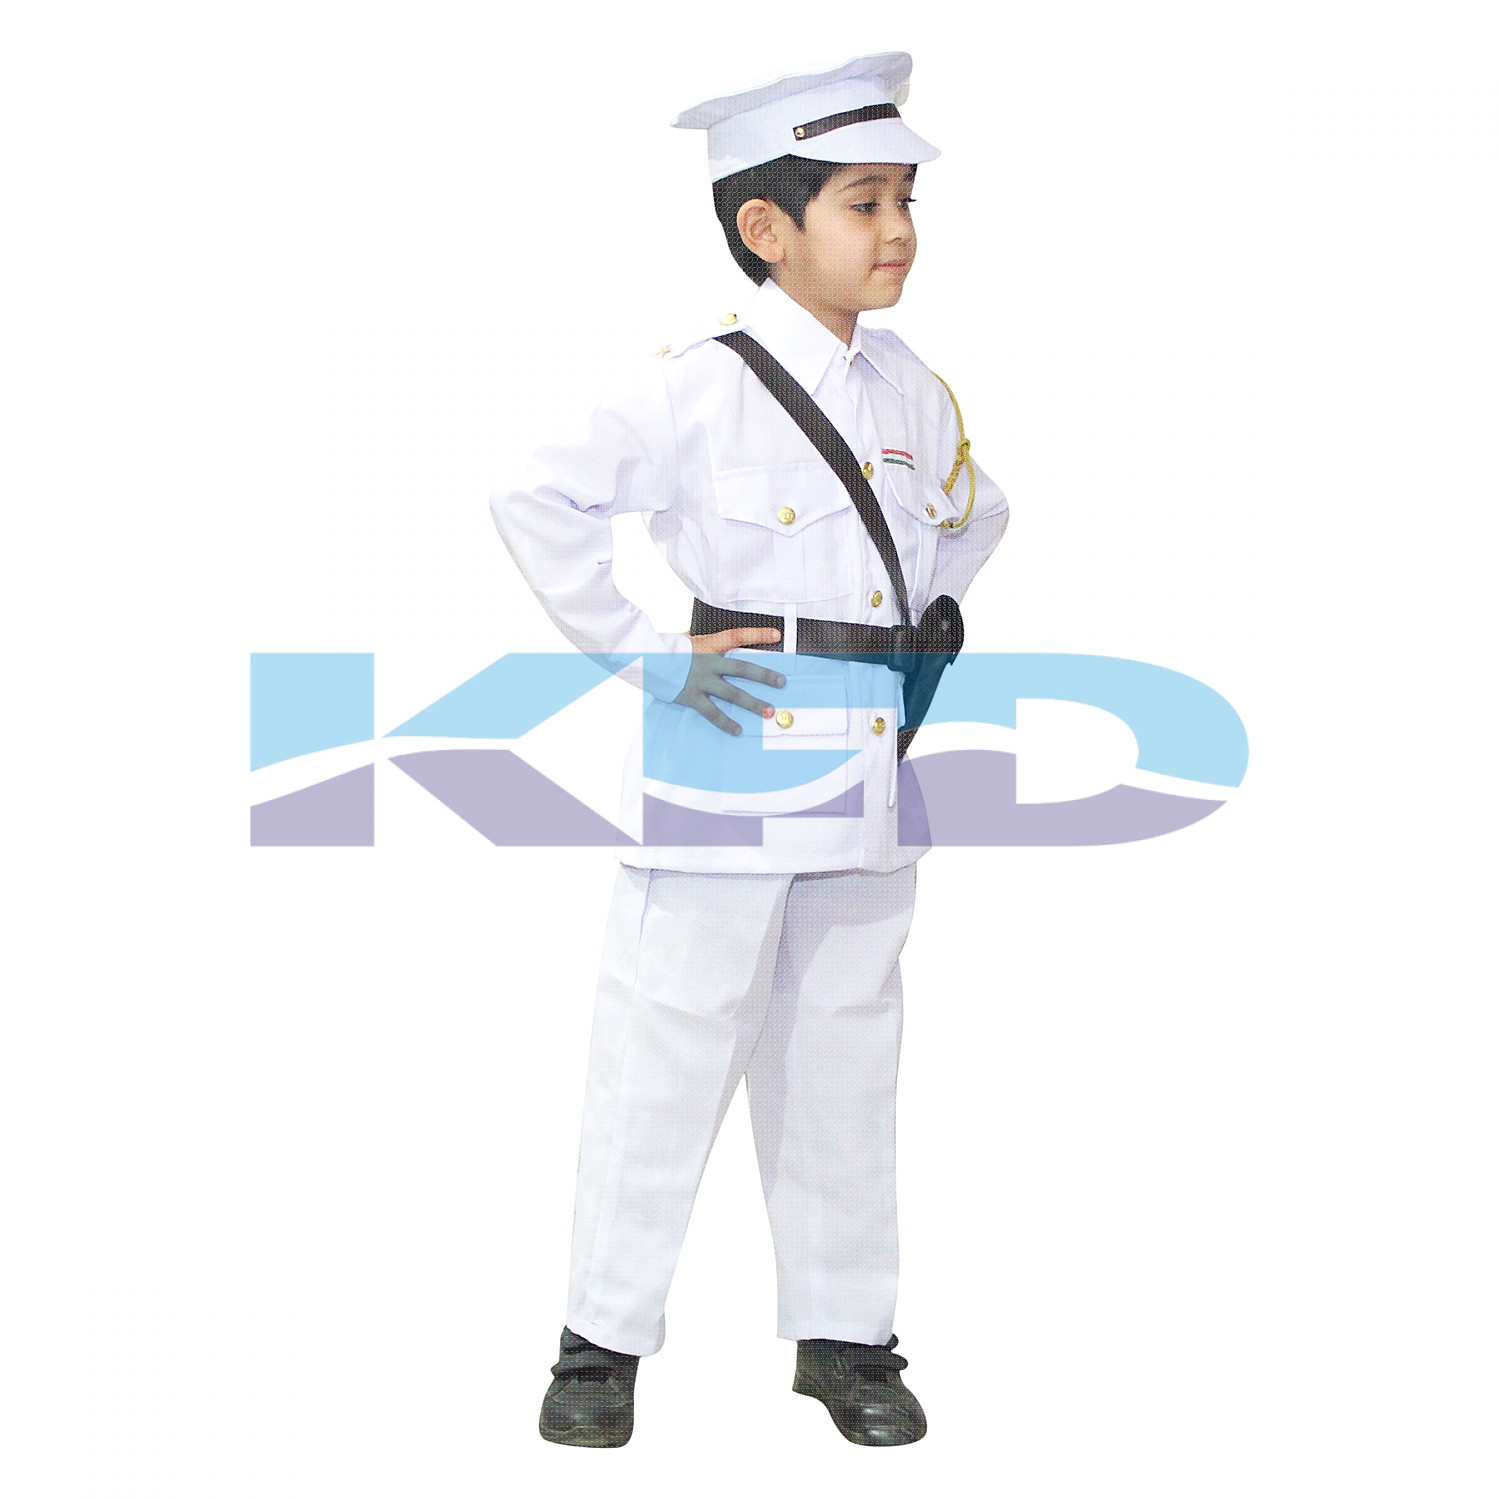 Buy Chipbeys Fancy Dress Indian Navy Costume for Boys and Girls with Cap  Online at Low Prices in India - Amazon.in